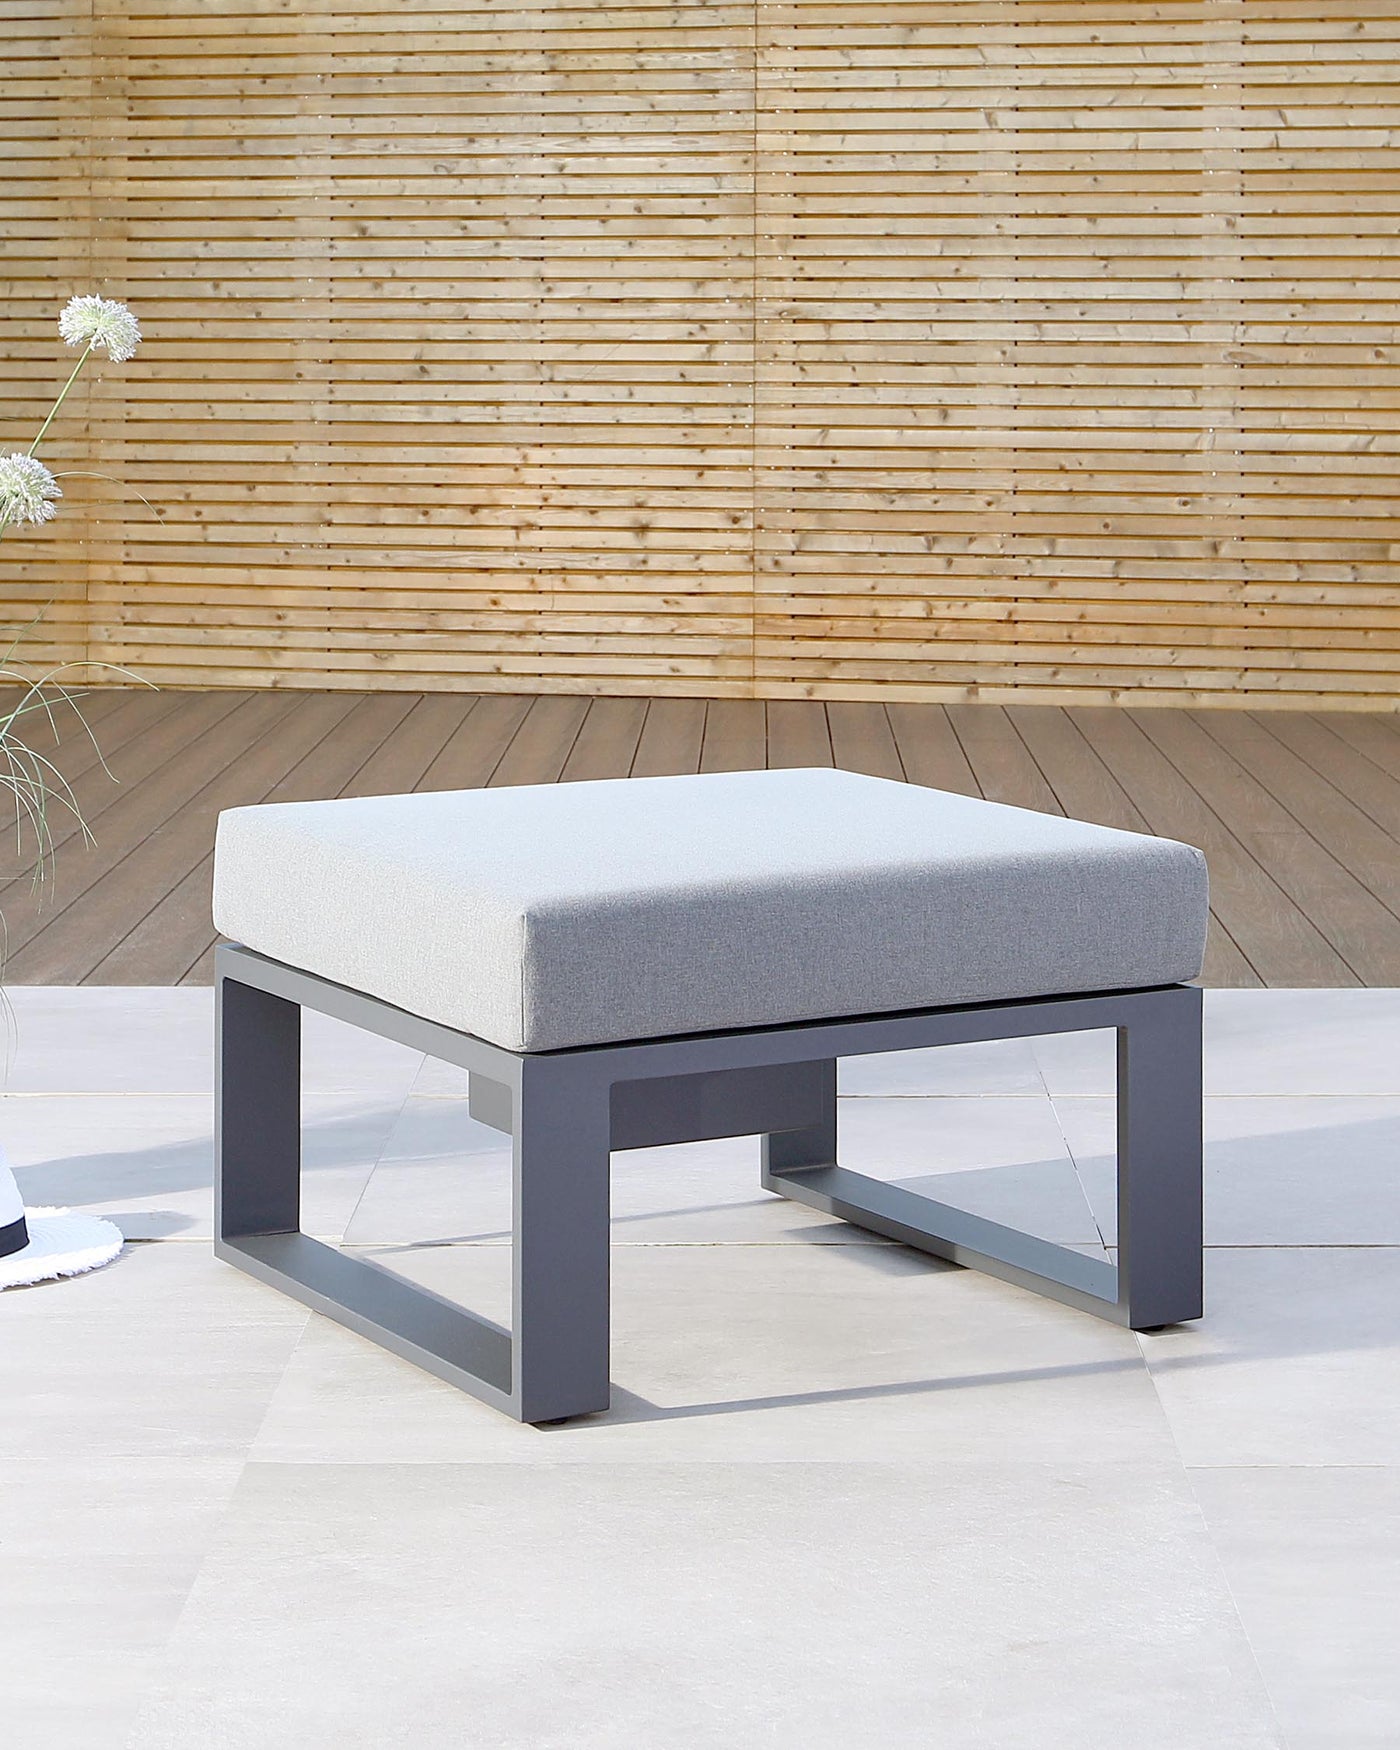 Modern outdoor ottoman with a grey cushion on a sleek, dark metal frame, displayed against a wooden slat backdrop and a tiled floor.